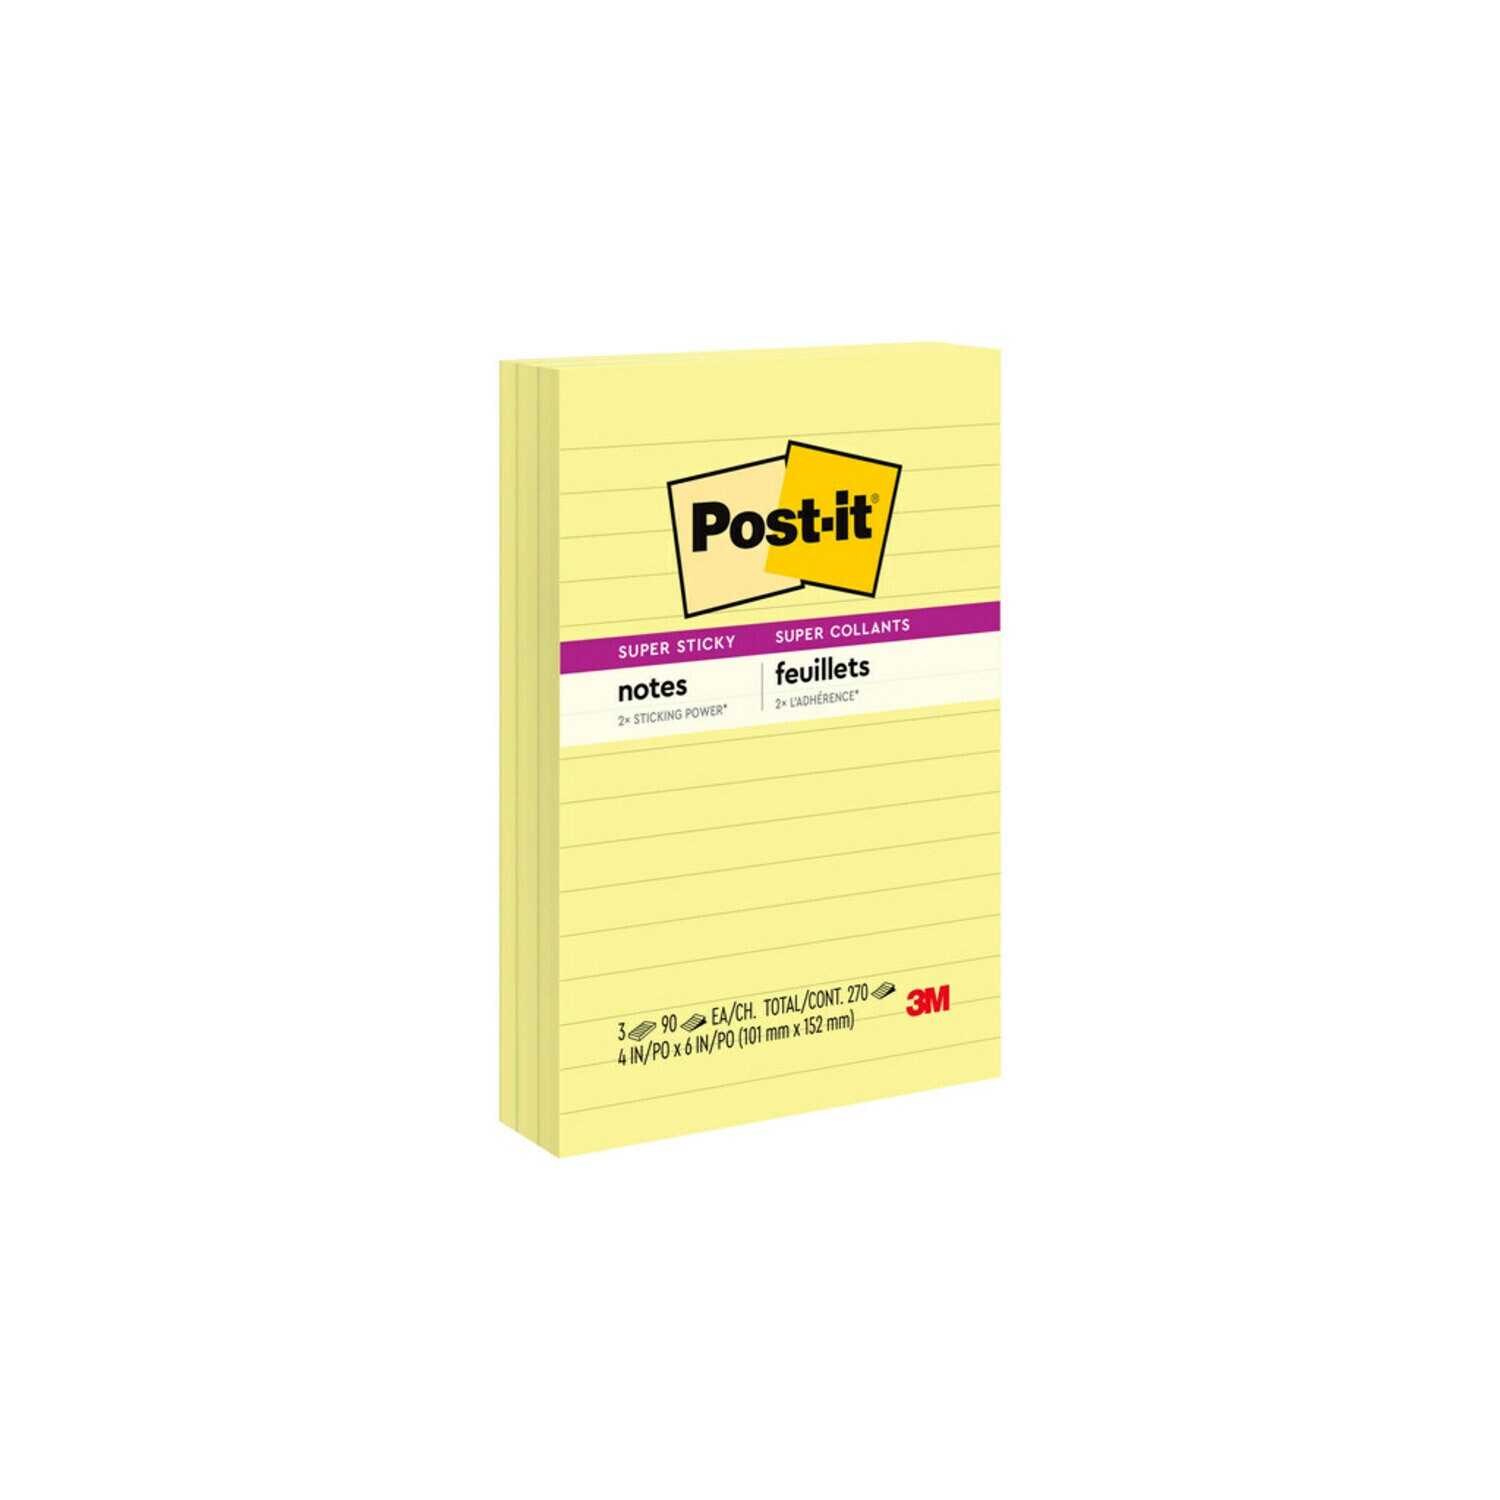 7010301606 - Post-it Super Sticky Notes 660-3SSCY, 4 in x 6 in Canary Yellow, Lined,
3 Pads/Pack